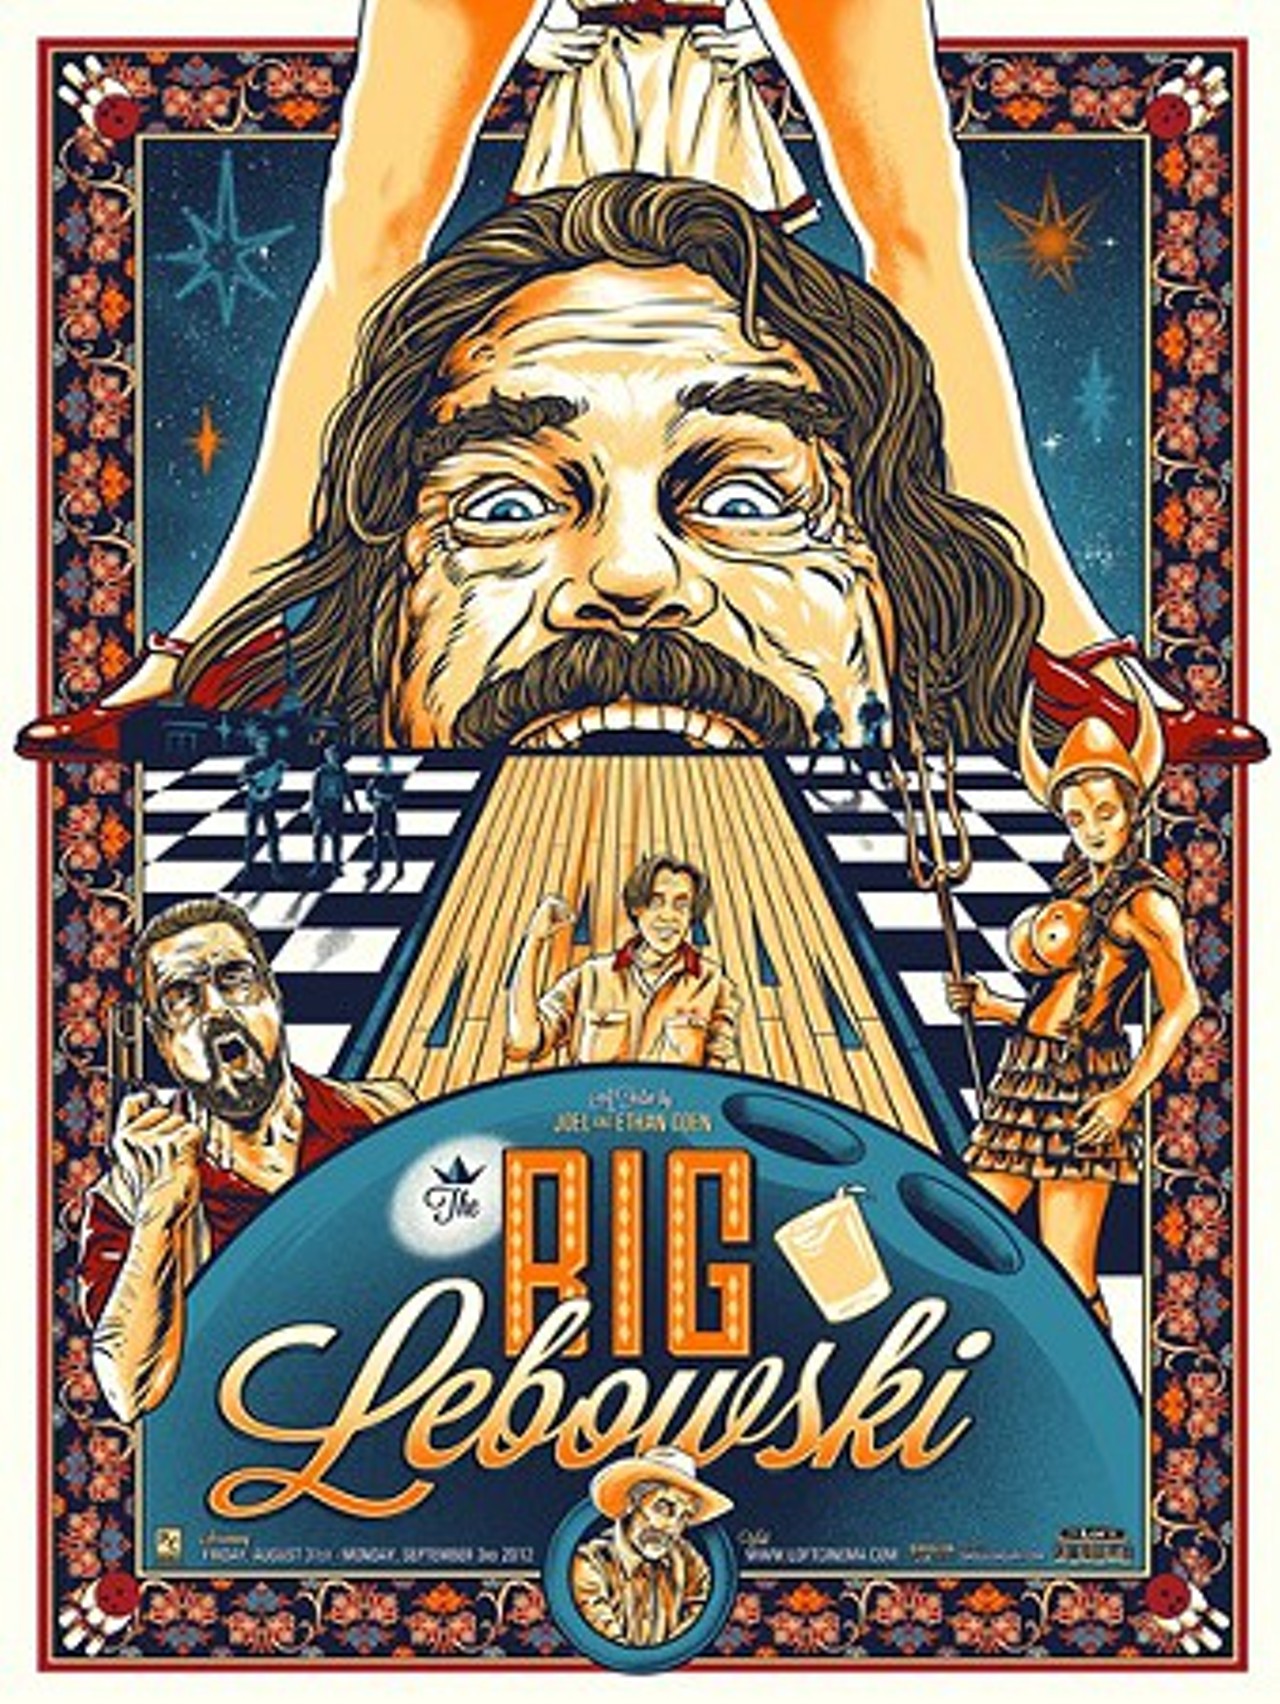 The ultimate cult movie for Cleveland’s ultimate cult movie series! Jeff Bridges, at his finest, portrays The Dude in The Big Lebowski, a Coen brothers’ movie about a stoner mistaken for a millionaire, his ruined rug and the bowling buddies he enlists to help seek restitution. This one’s a '90s classic that you probably watched in college a few times when nothing else was going on. It features some fine work by Coen standbys John Goodman, Steve Buscemi and John Turturro in supporting roles. Bridges won an Oscar for his performance in Crazy Heart, but he’ll always be most remembered for his exquisite turn as Lebowski. It screens at midnight tonight at the Cedar Lee Theatre. Tickets are $5. (Allard)